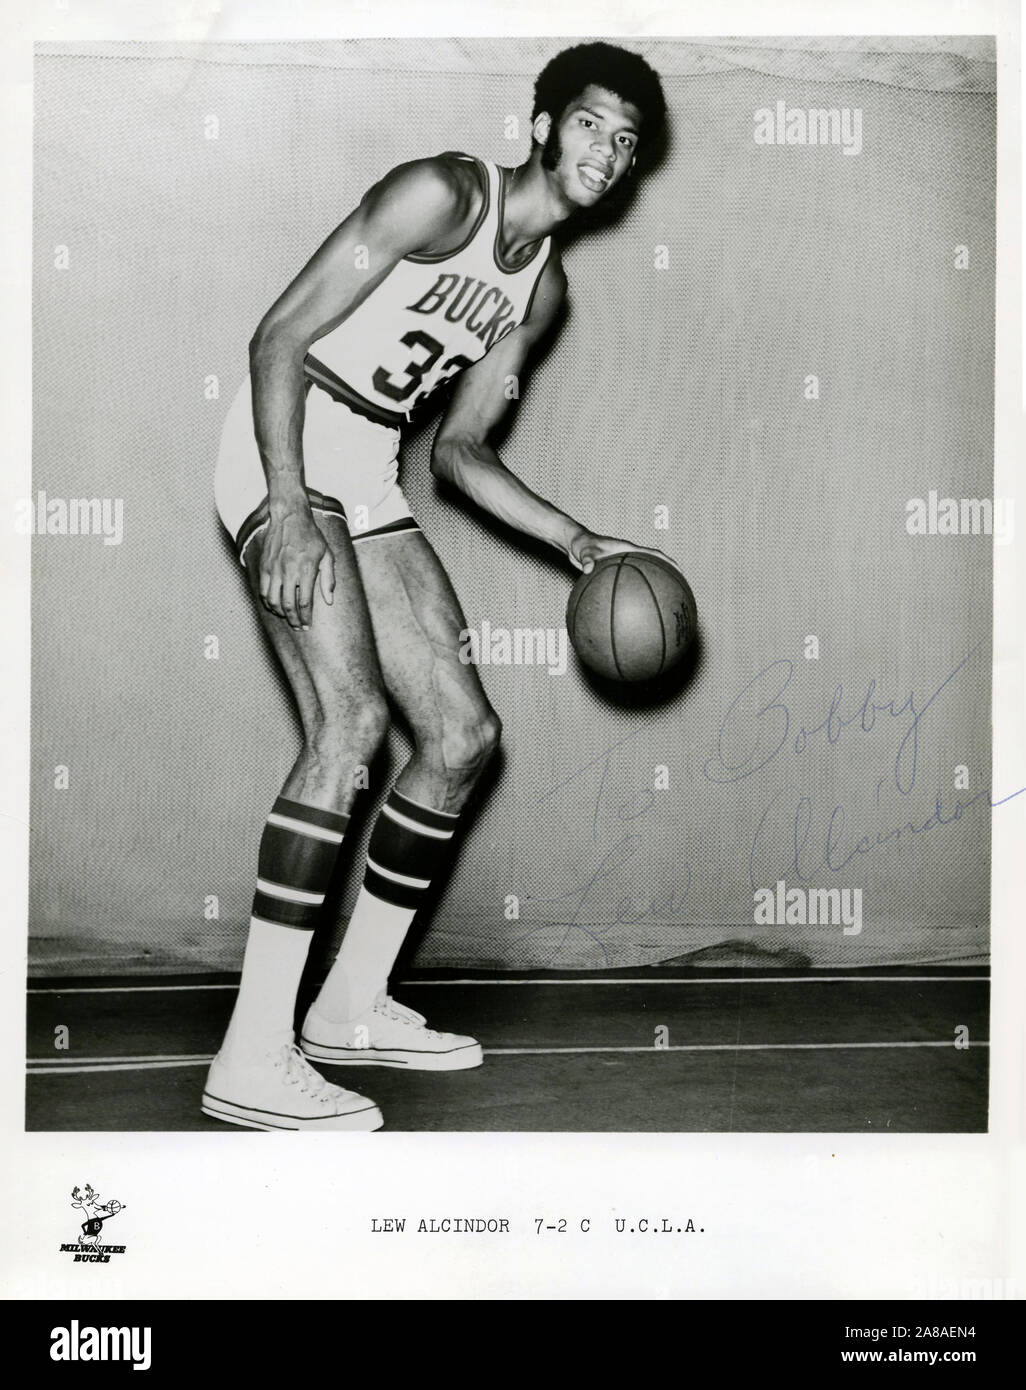 Early publicity still of basketball star Kareem Abdul Jabbar who was then still called Lew Alcindor with the Milwaukee Bucks. Jabbar played his college ball at UCLA and later was a star with the L.A. Lakers of the NBA. Stock Photo